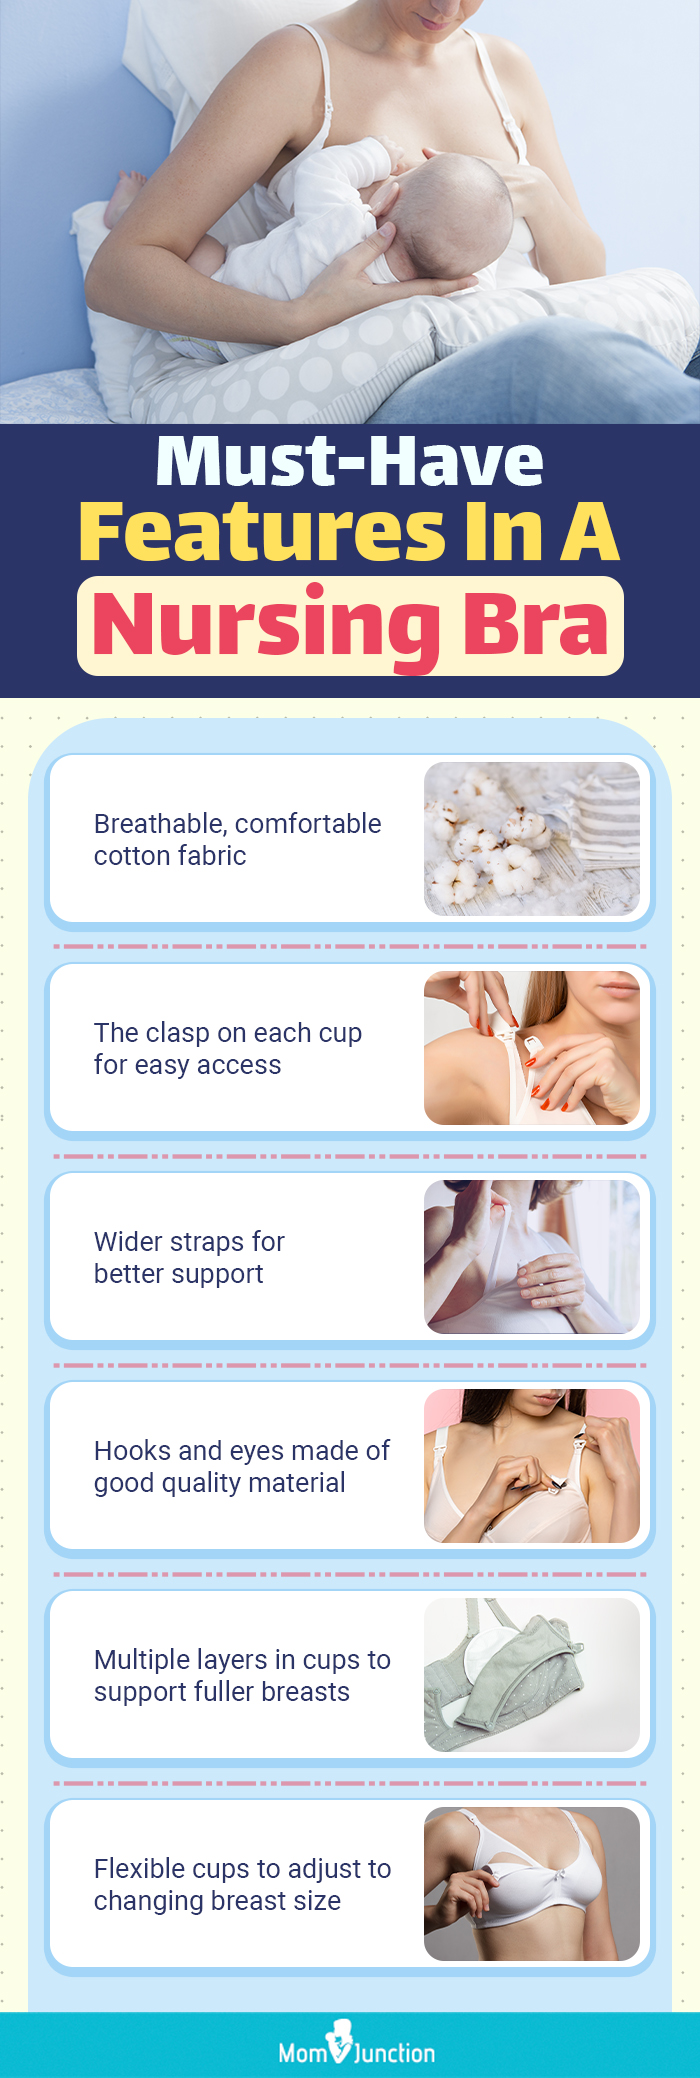 must have features in a nursing bra (infographic)